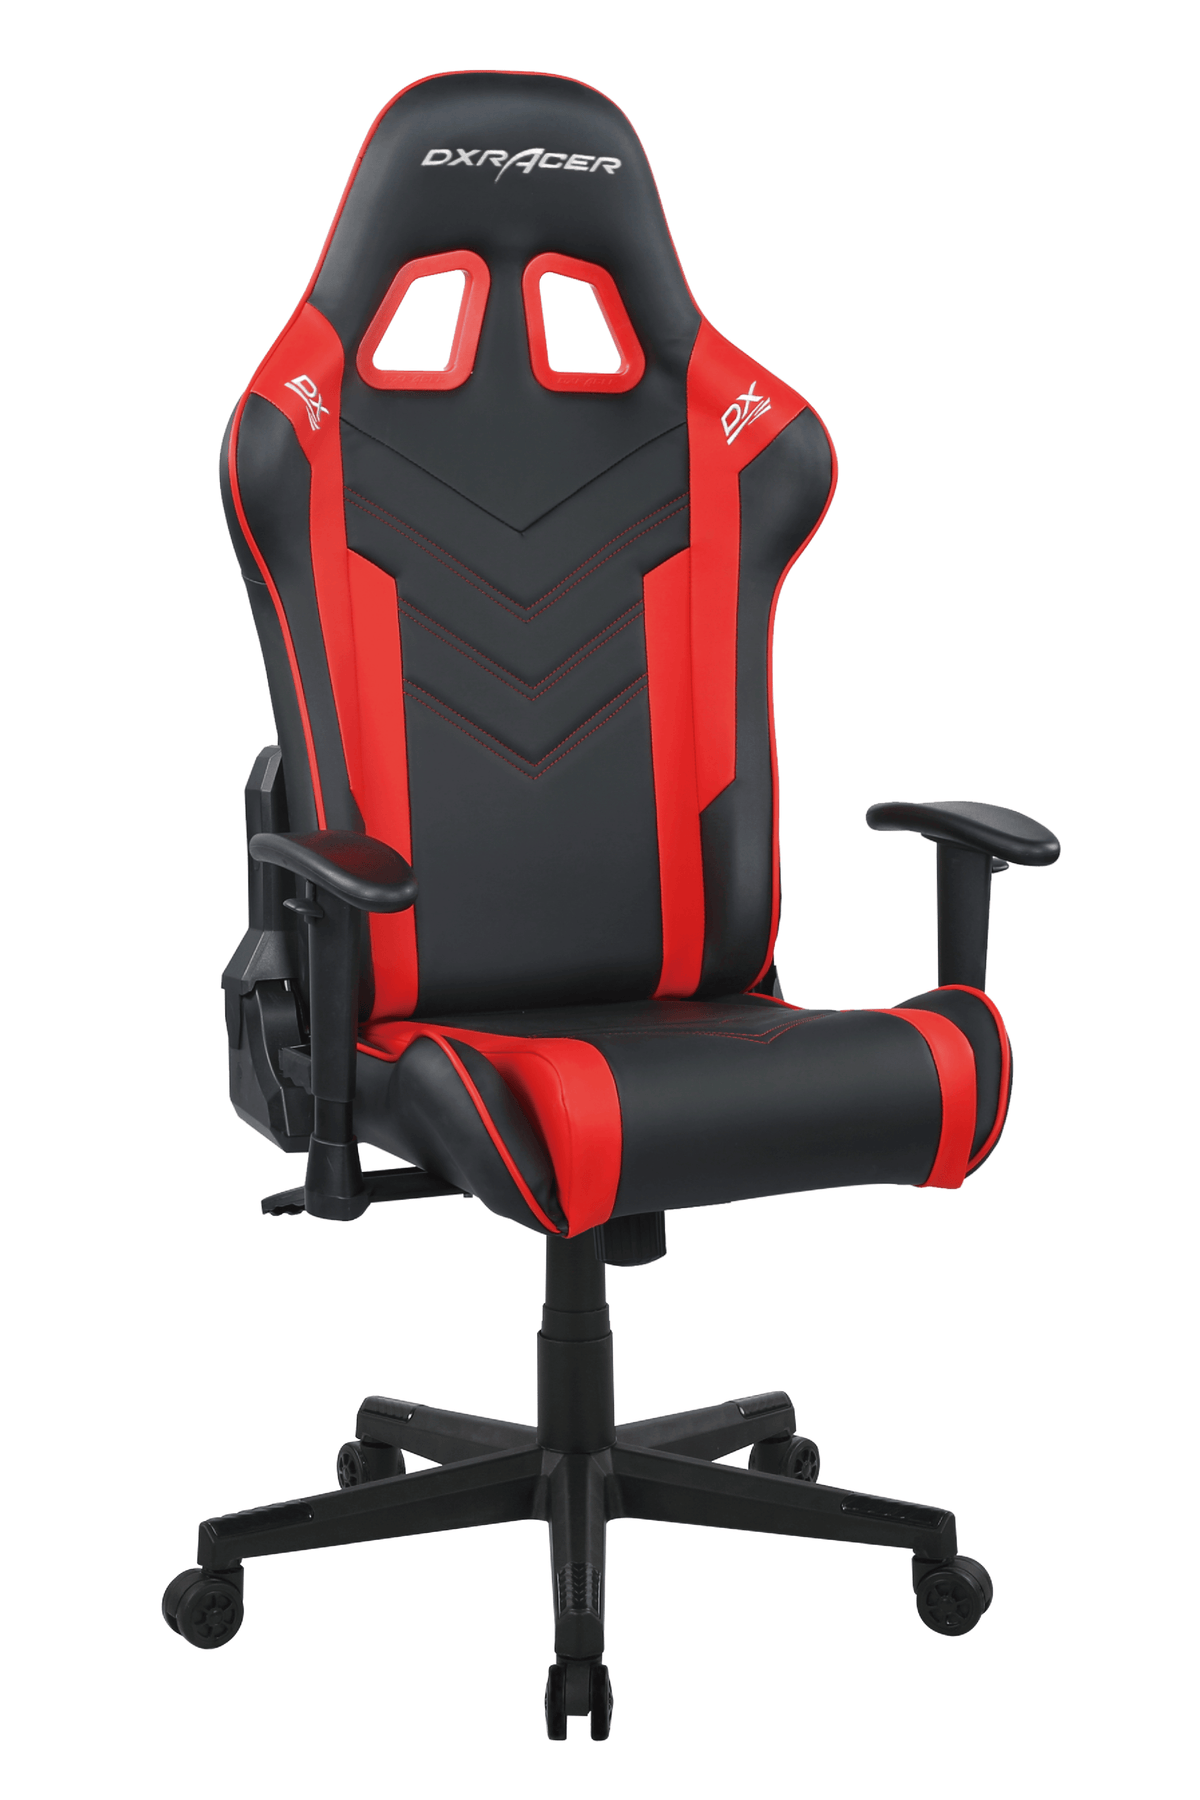 Enjoy Extreme Action by Sitting on Dxracer Gaming Chair